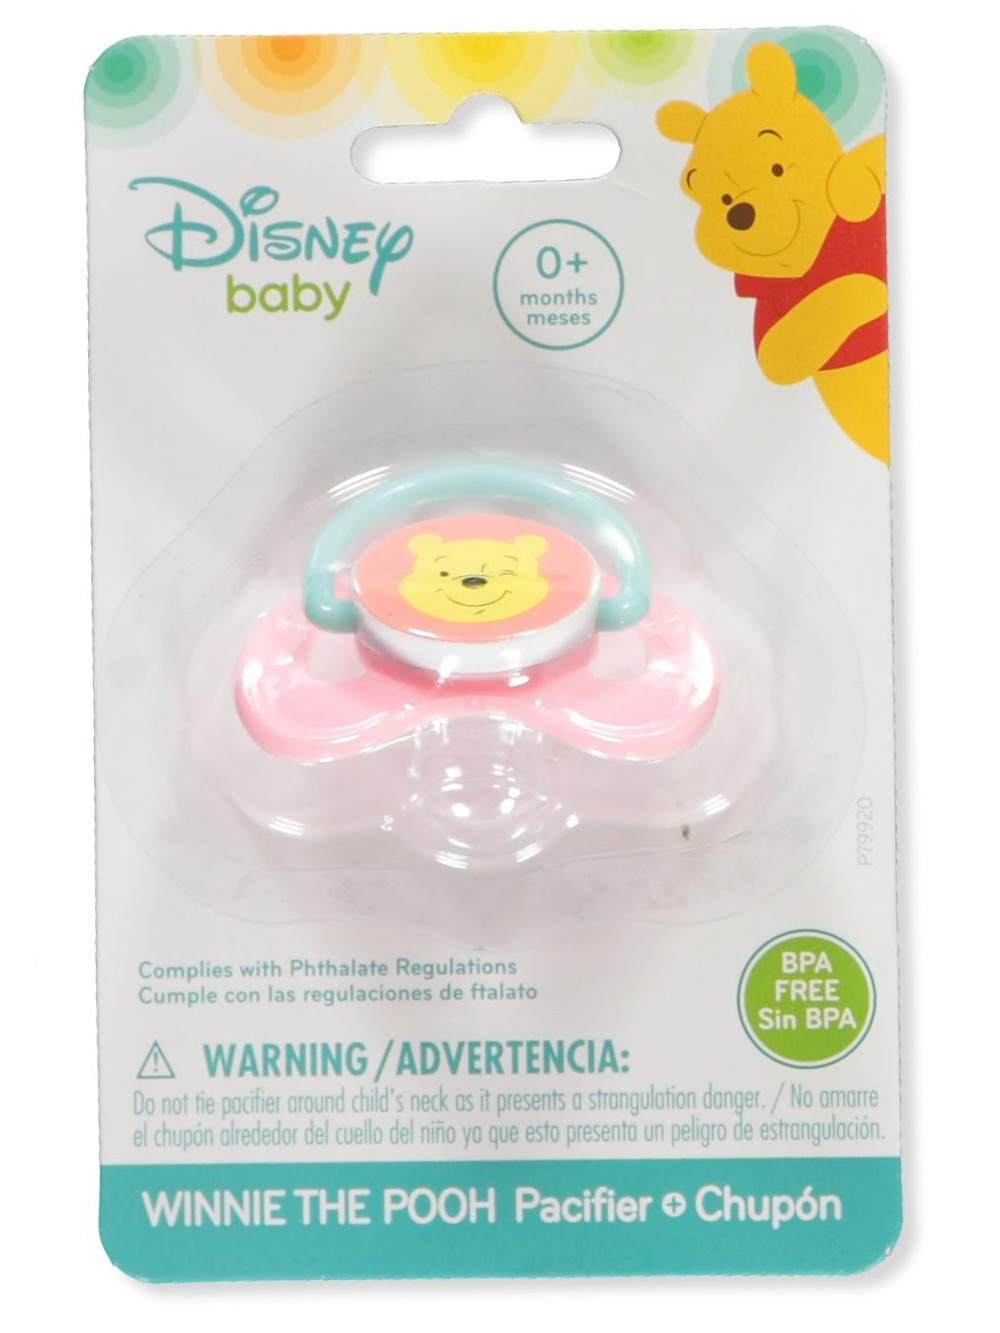 REGENT BABY PRODUCT Pacifiers